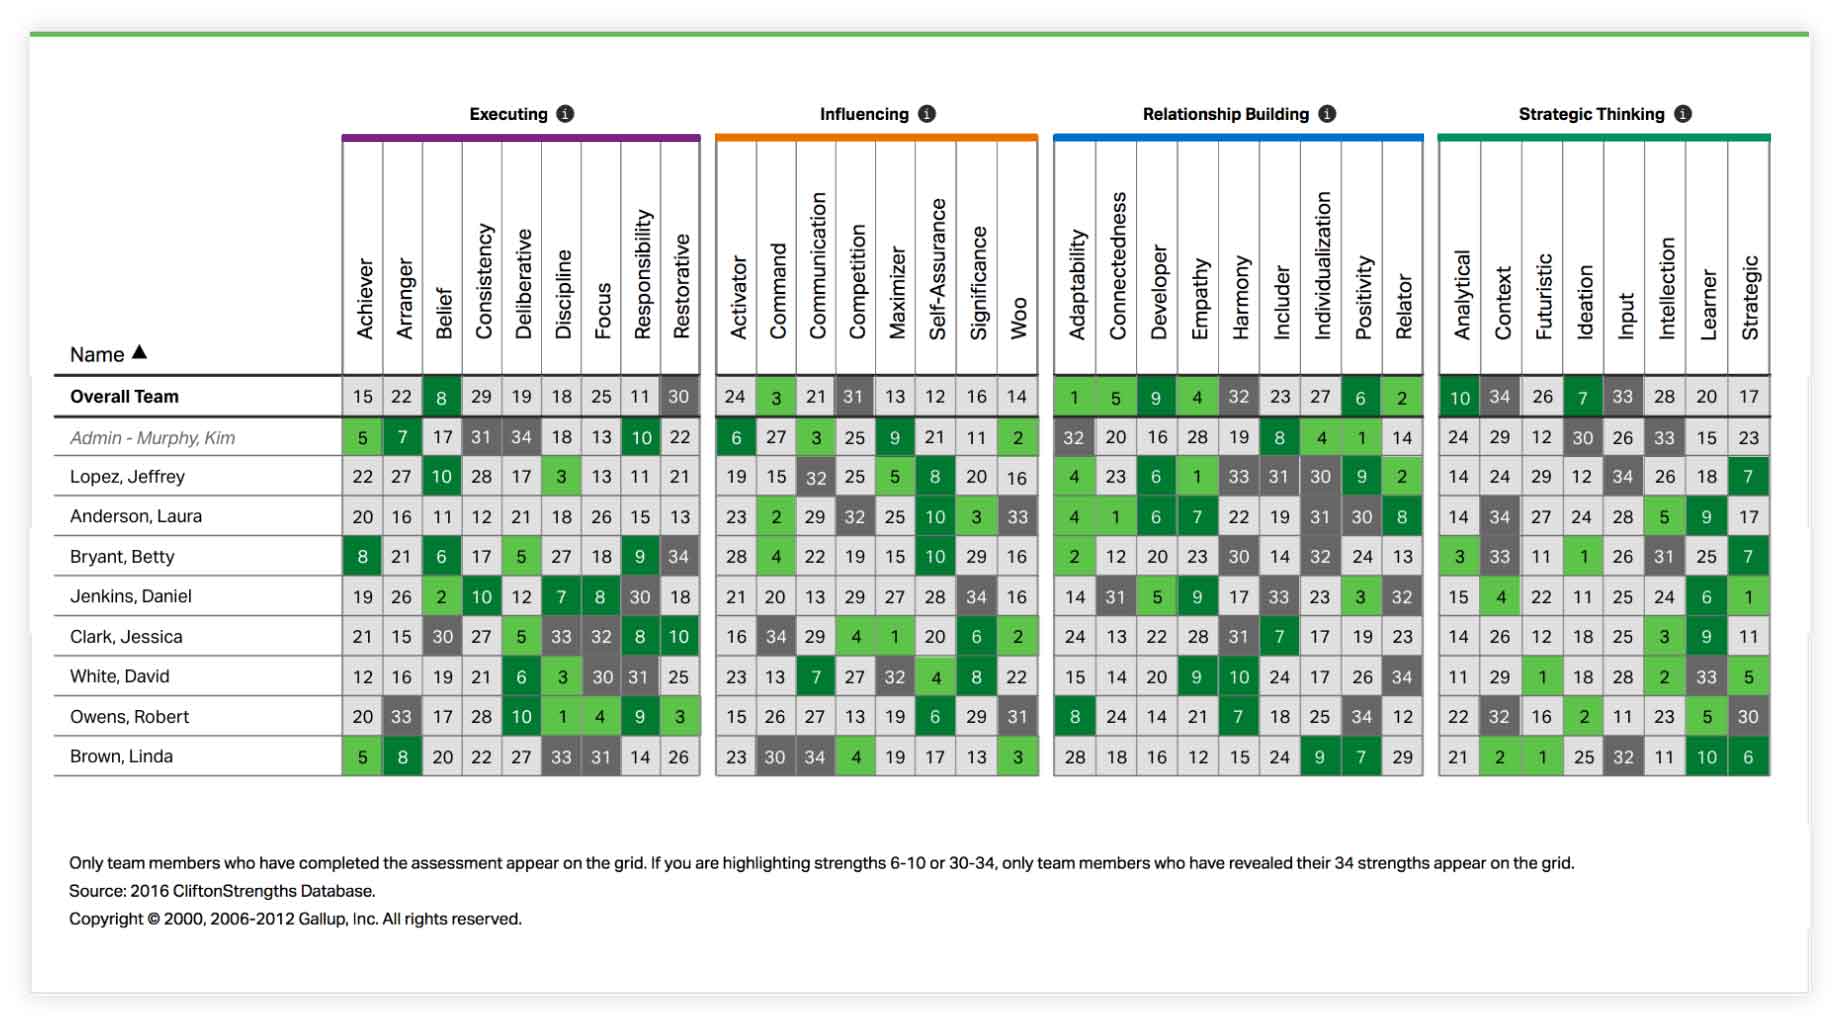 A CliftonStrengths team grid illustrates each individual member’s 34 strengths organized by domain. Each member is listed for easy team strengths comparison.